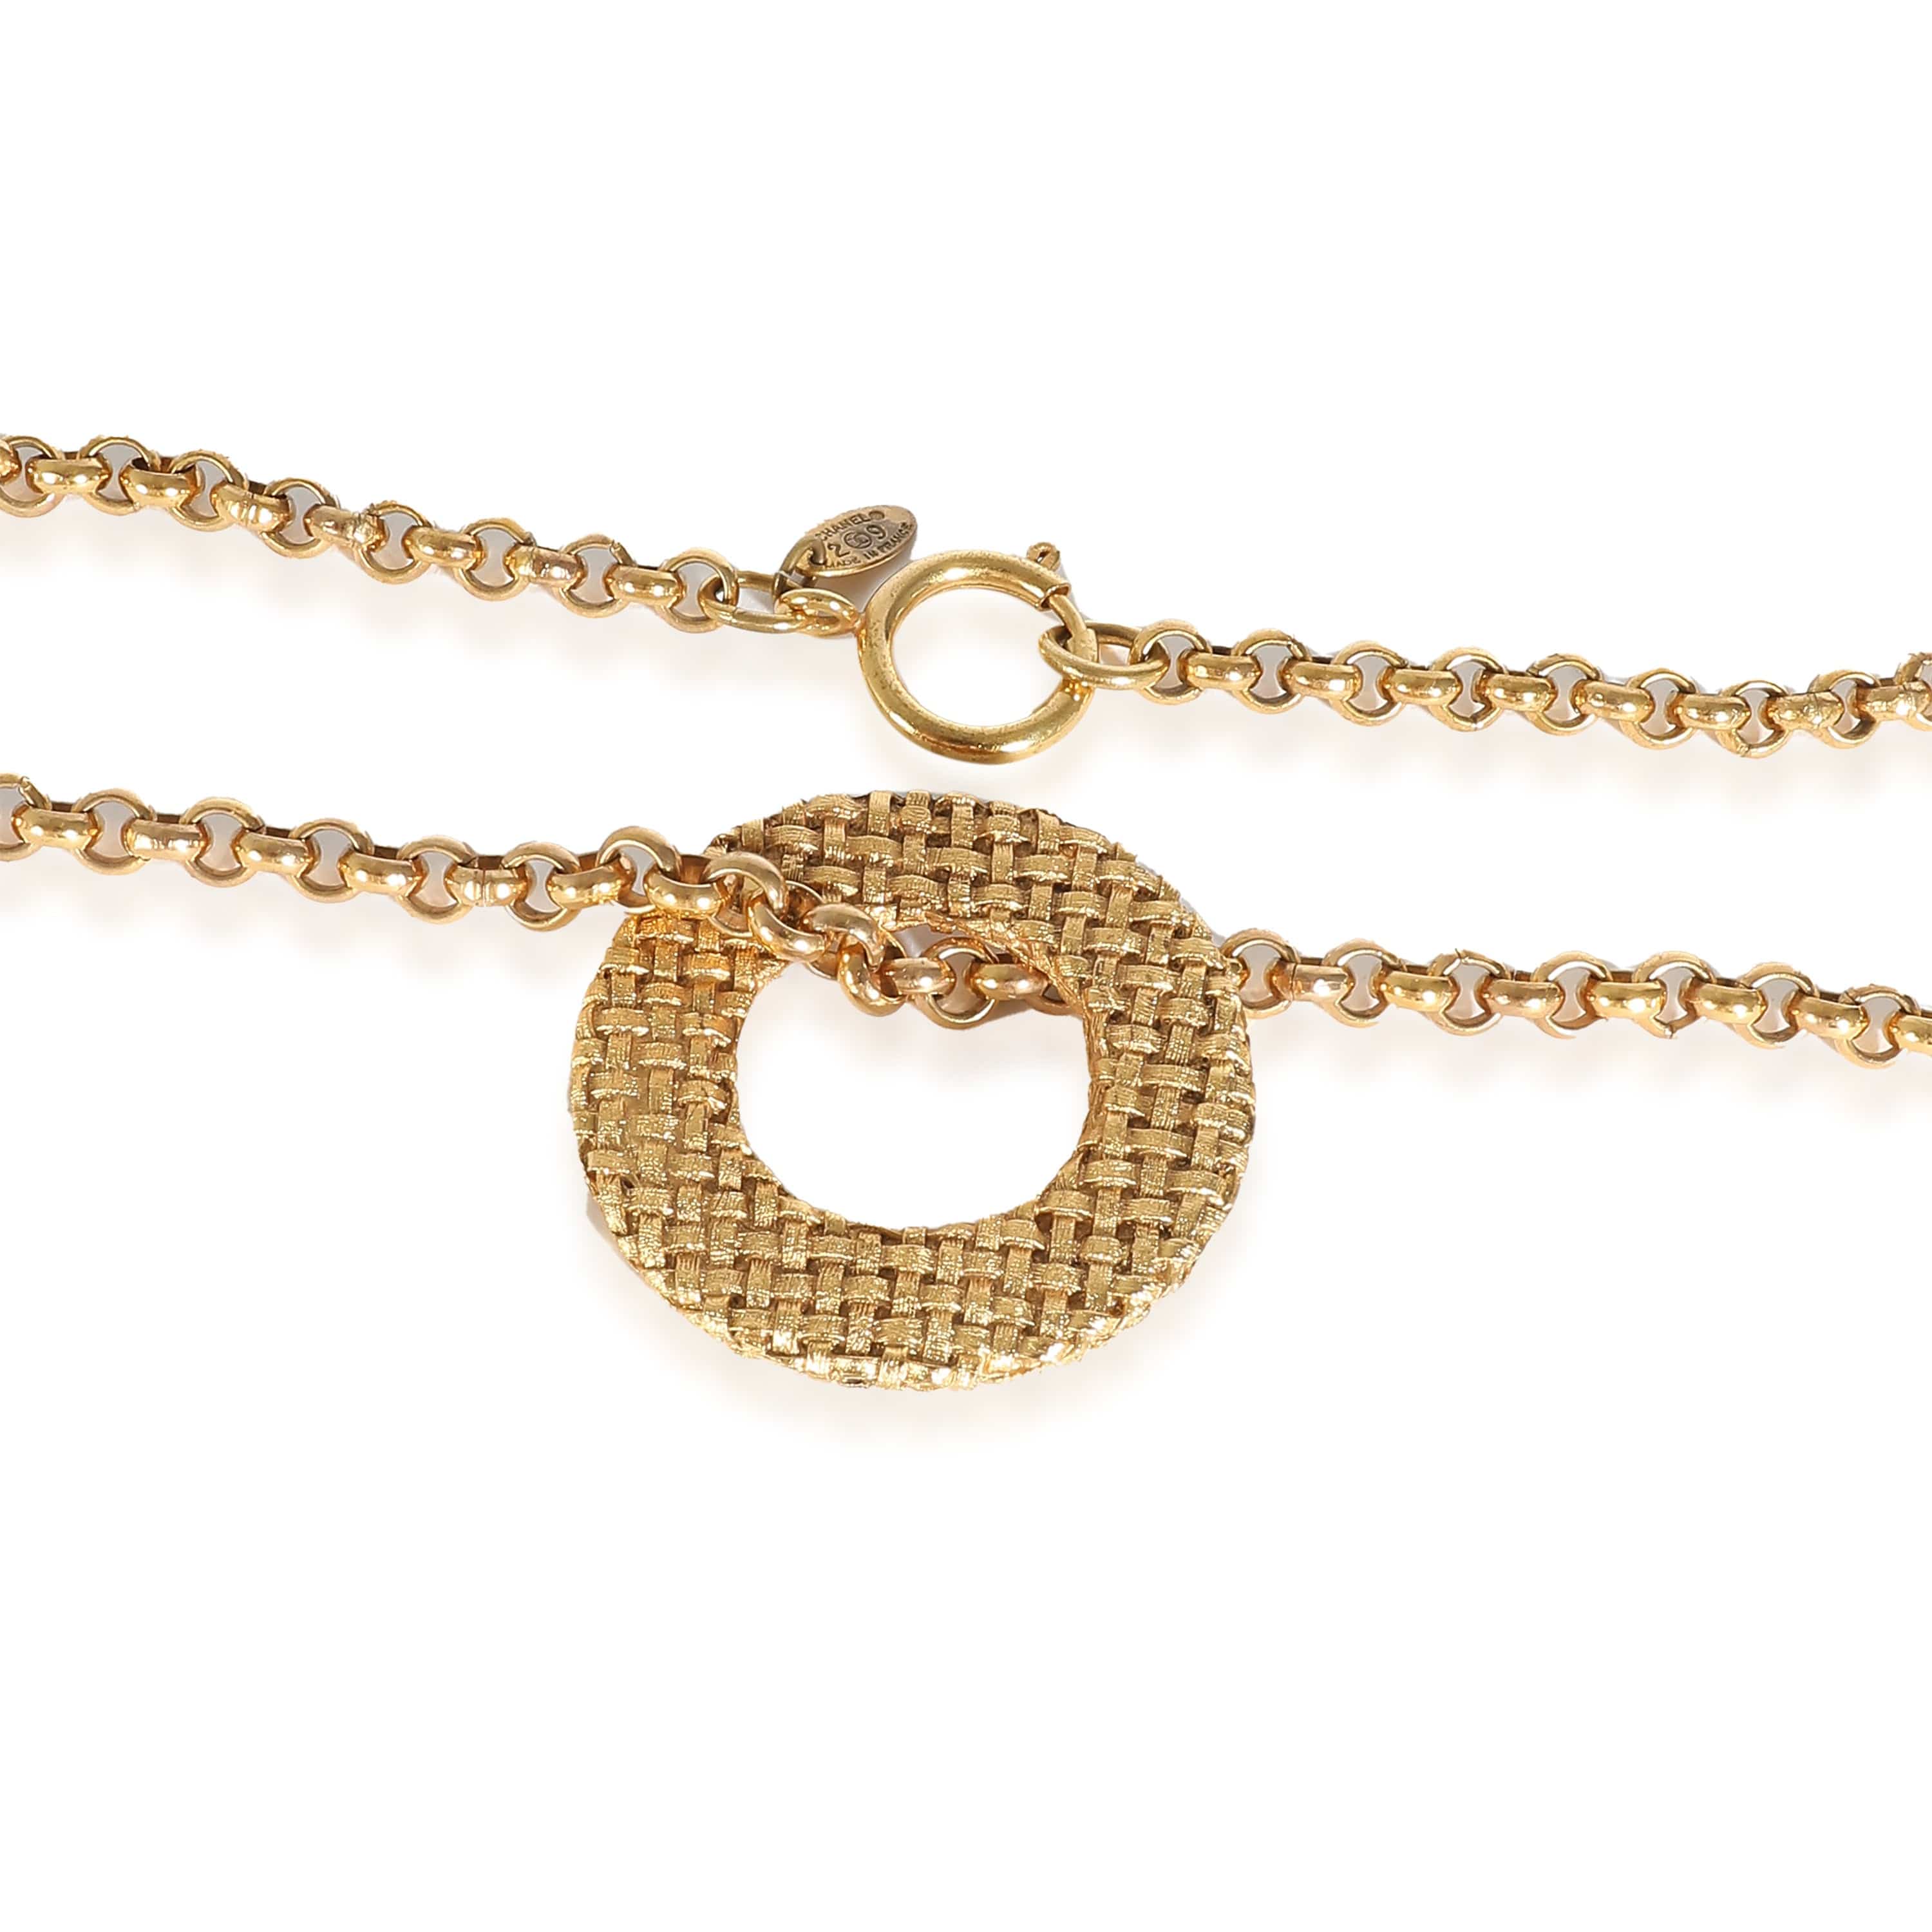 Chanel Chanel Gold Necklace KRC26480-FD